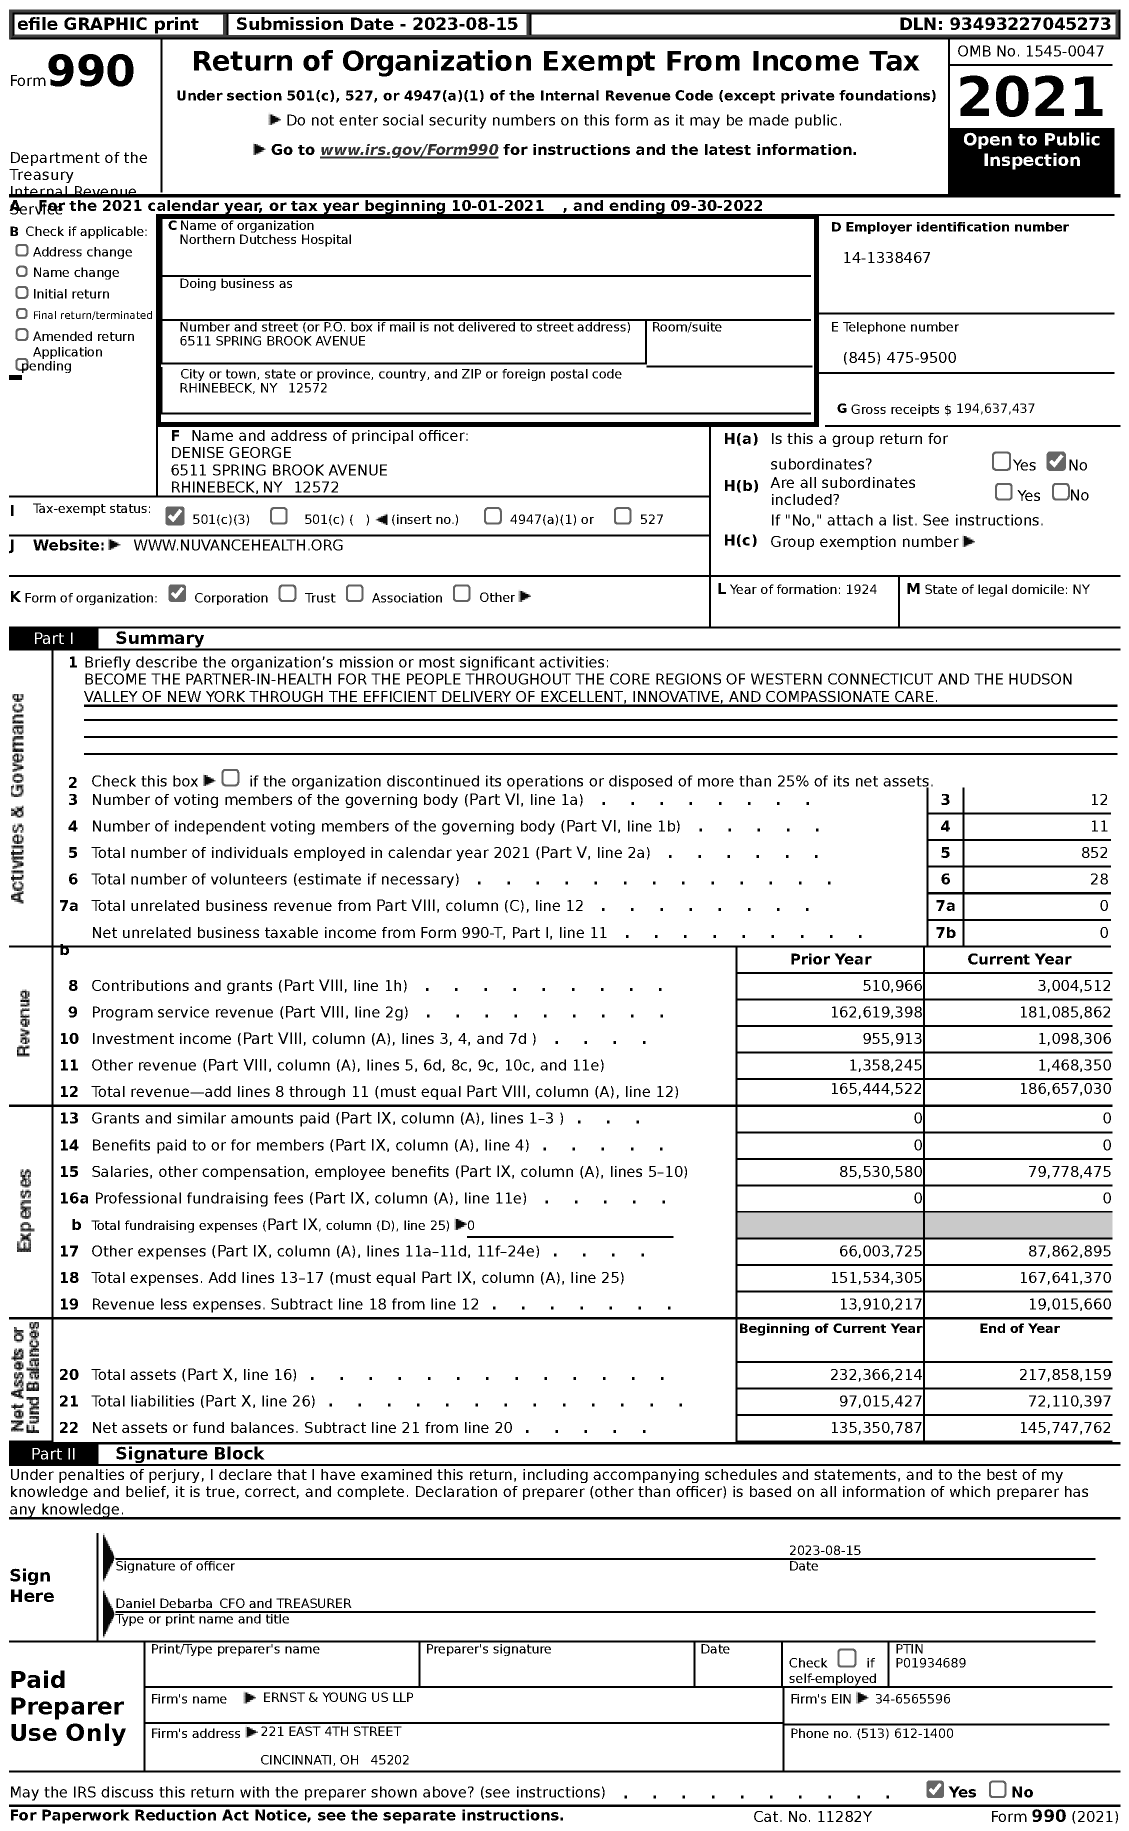 Image of first page of 2021 Form 990 for Northern Dutchess Hospital (NDH)